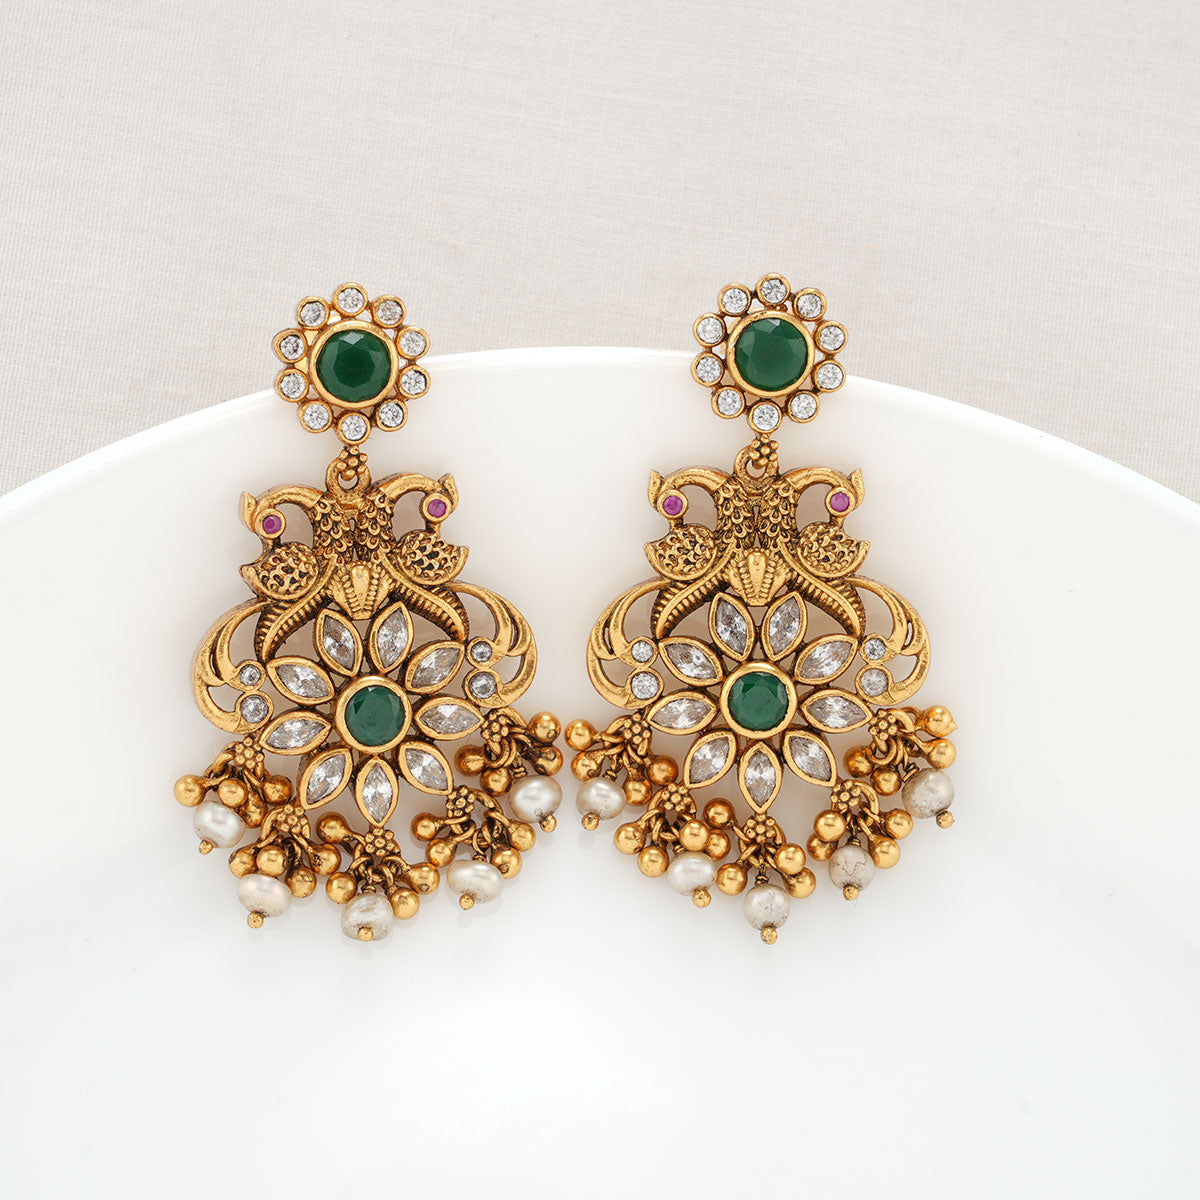 Discover 97+ white stone earrings in grt super hot